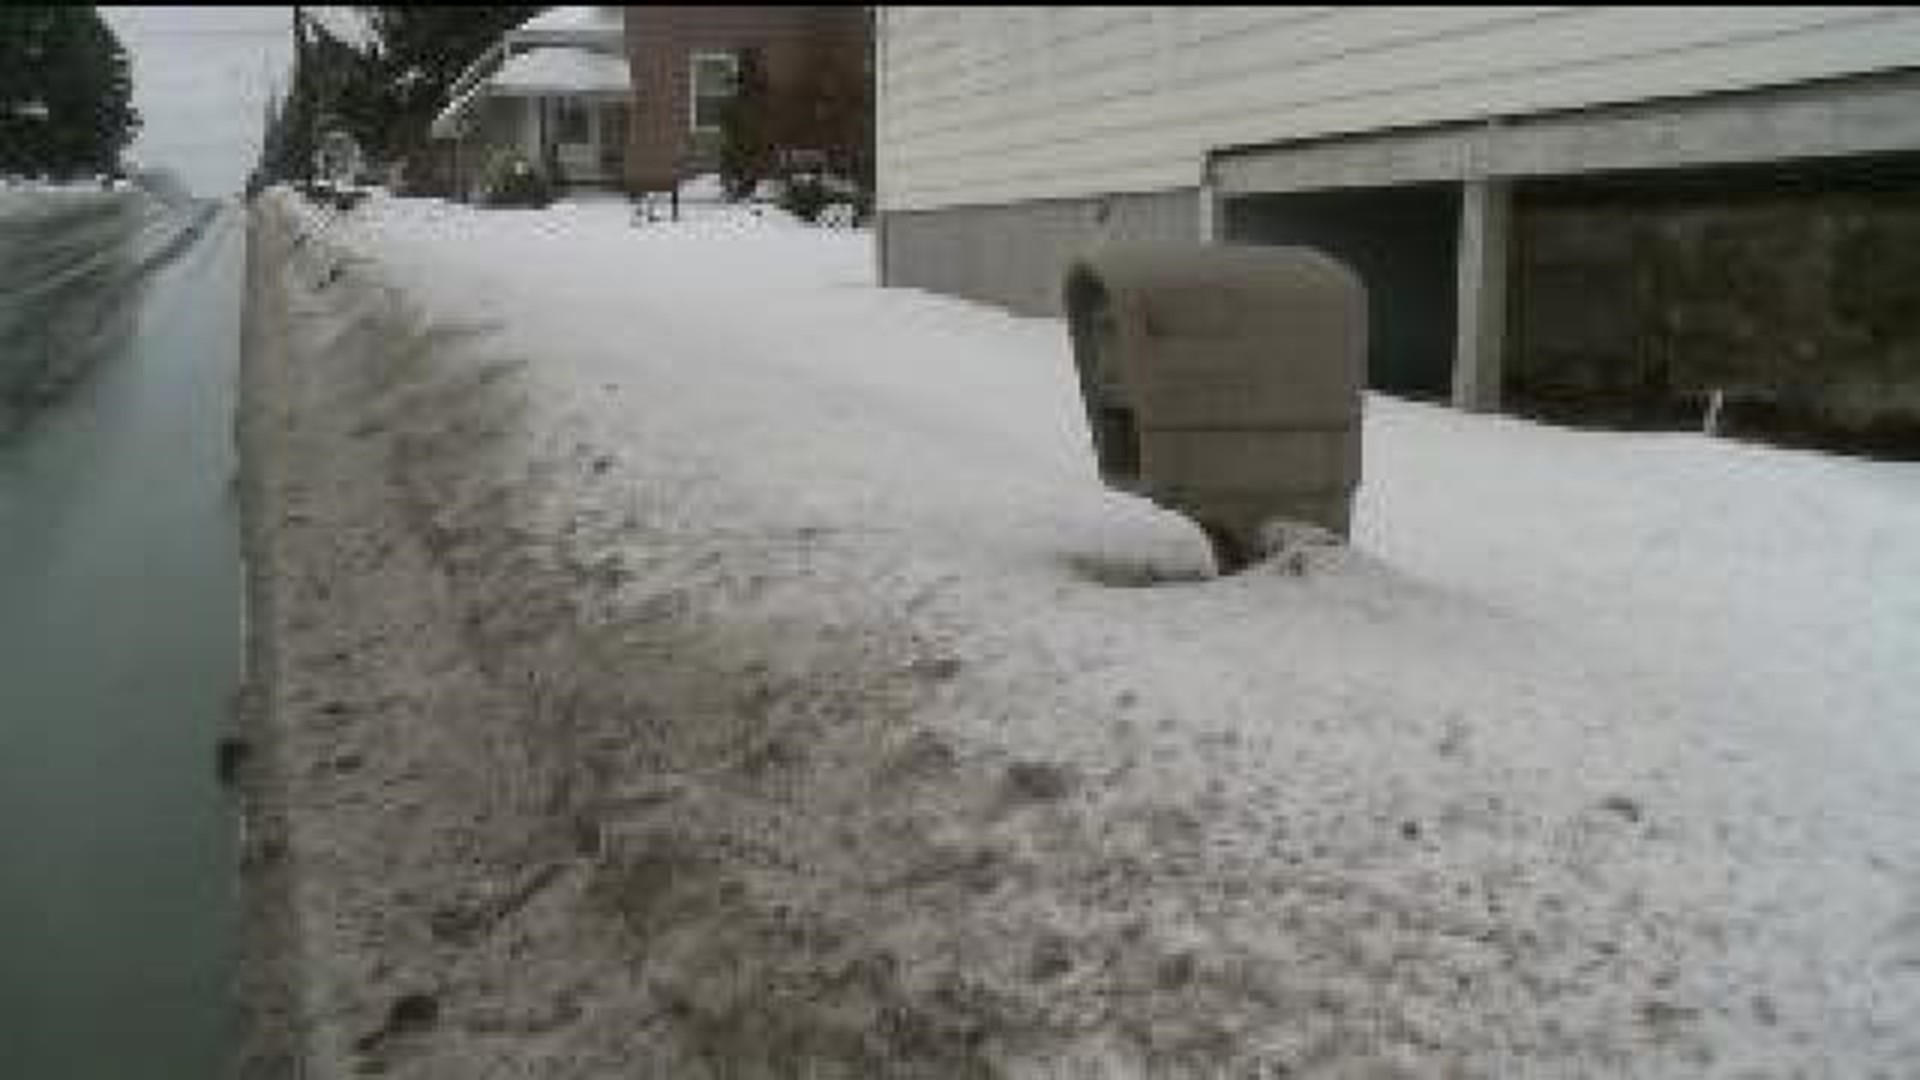 Digging Out To Make Room For The Mail Carrier